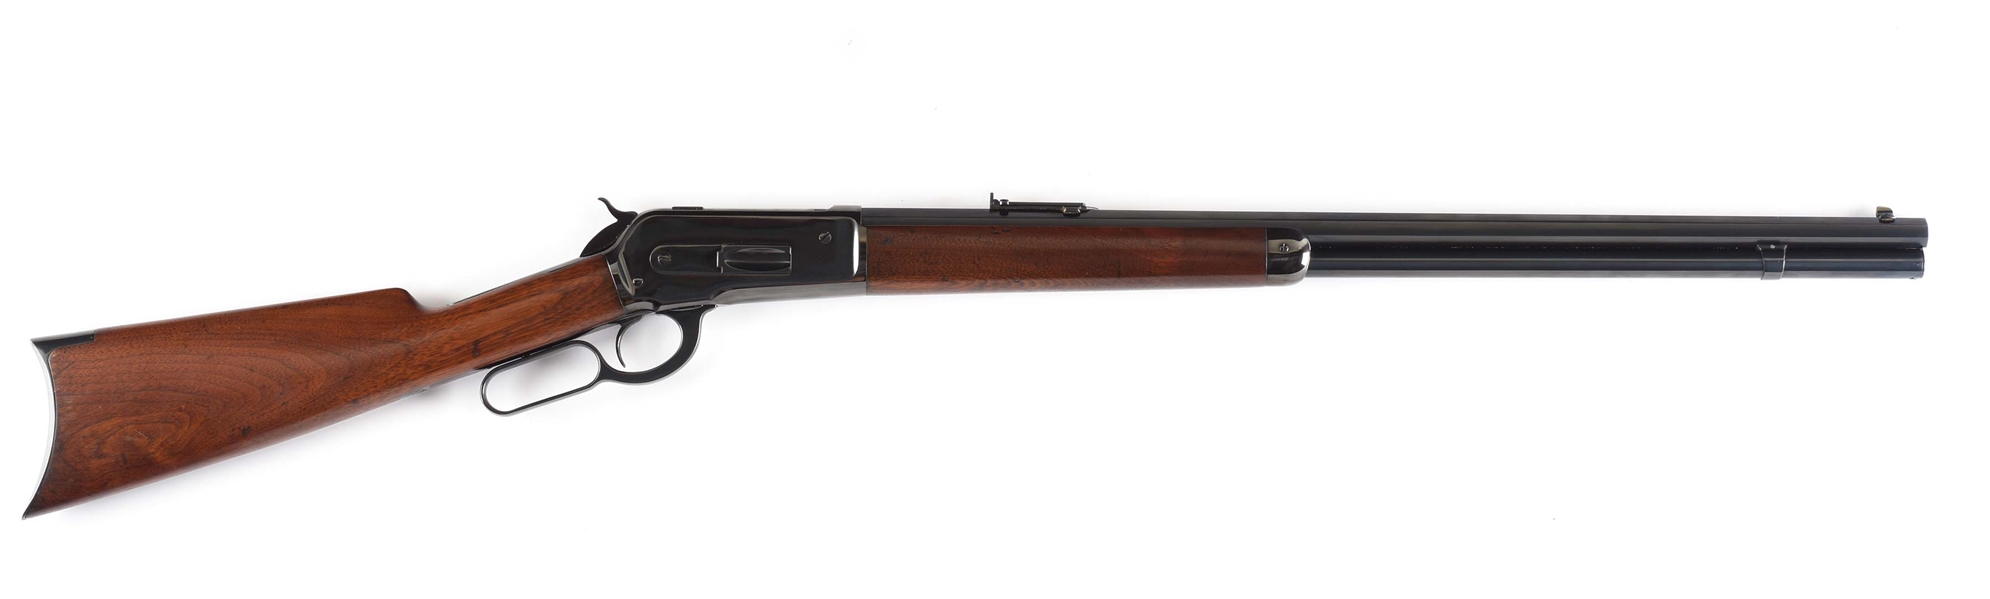 (A) ANTIQUE WINCHESTER MODEL 1886 .45-70 CALIBER LEVER ACTION RIFLE (1898).